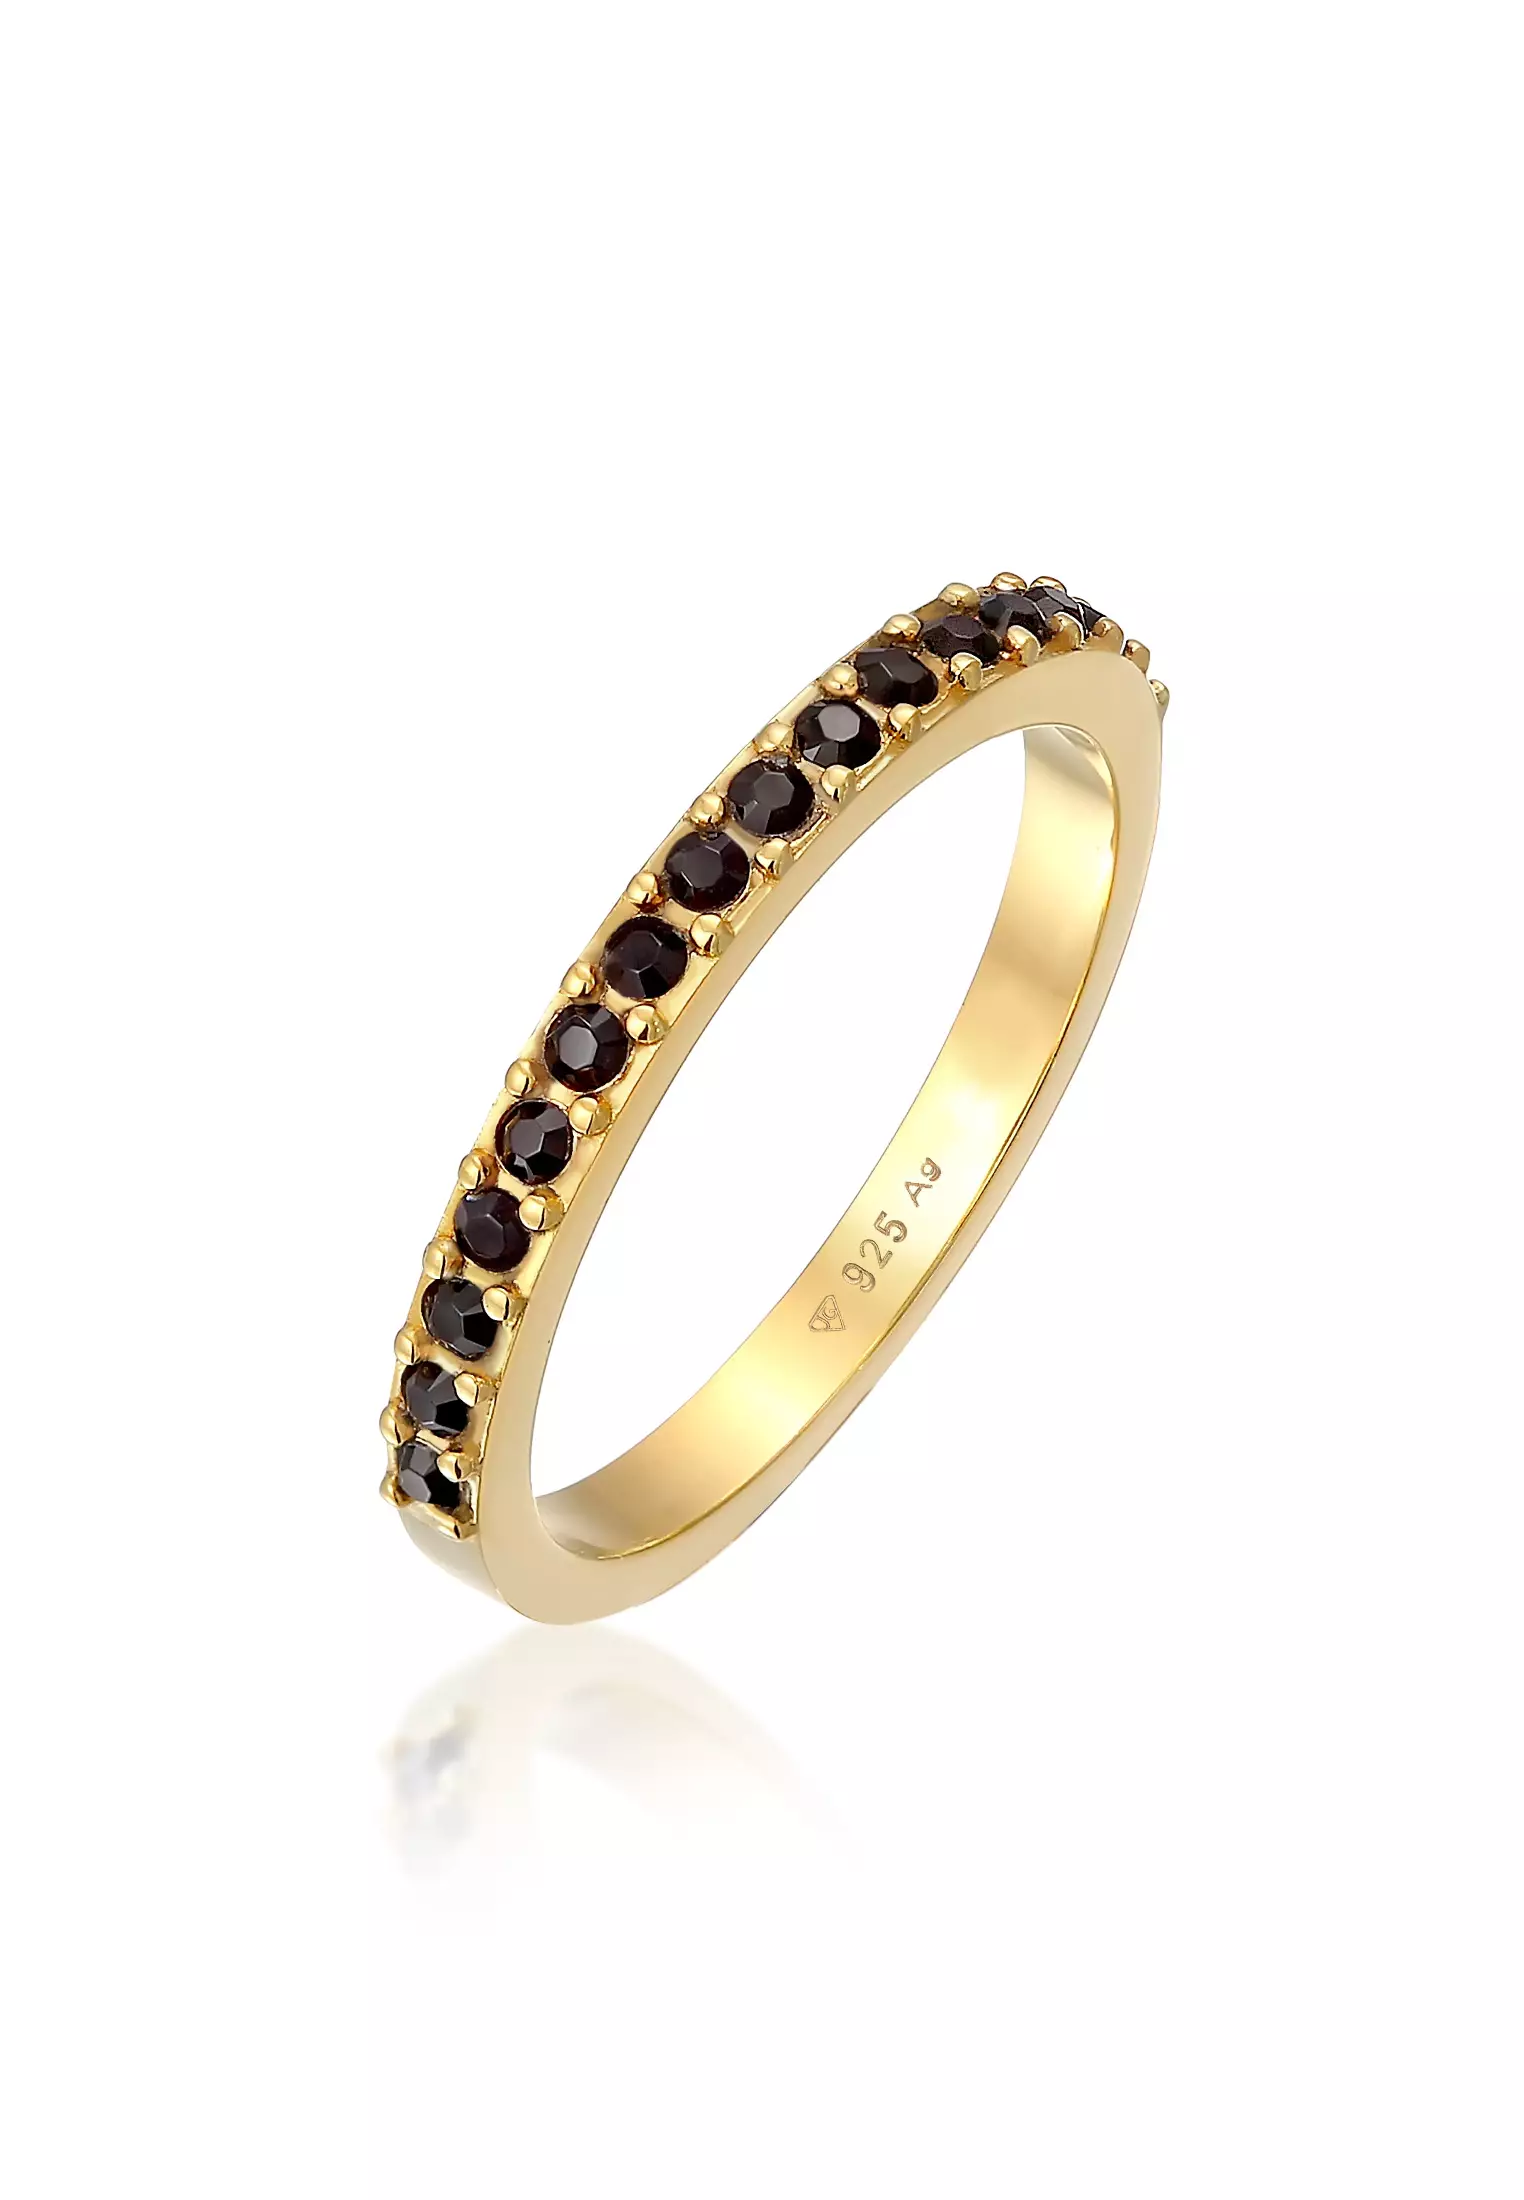 Buy ELLI GERMANY Ring Memoire Crystals Malaysia ZALORA Band Online Plated Gold 